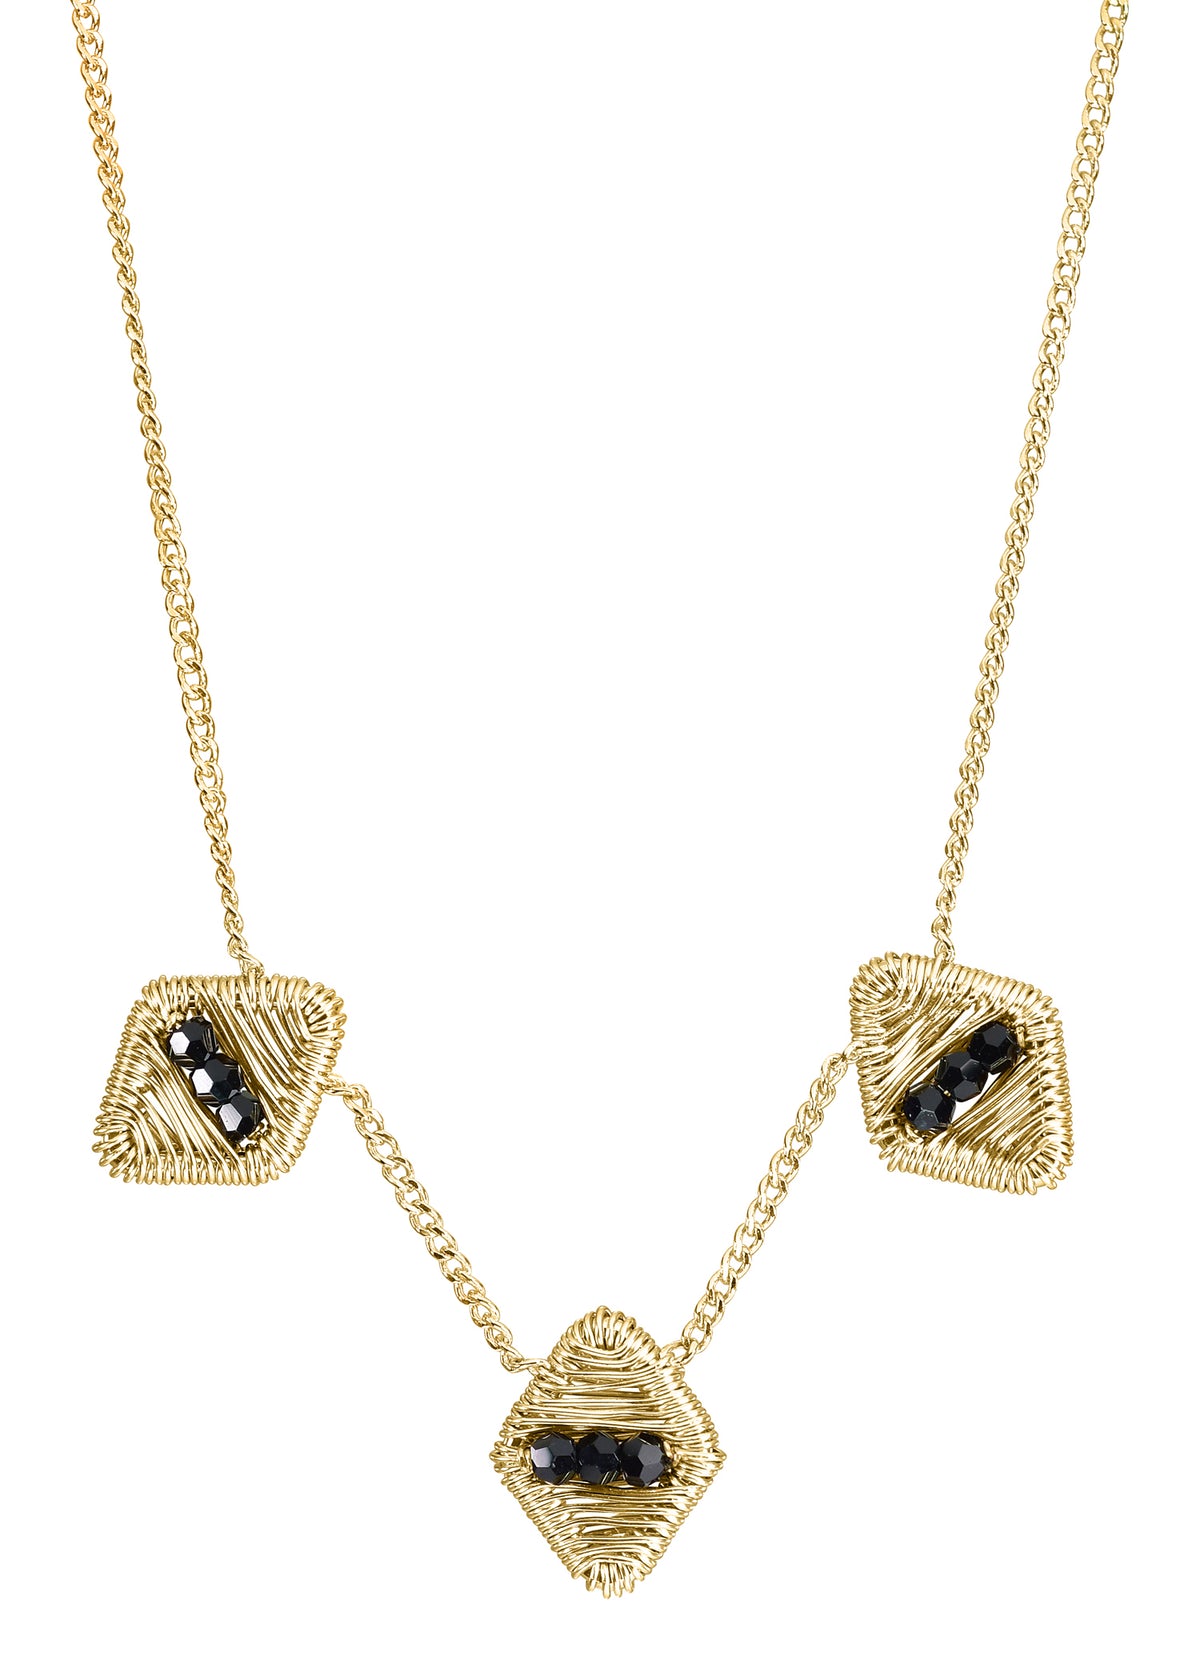 Crystal 14k gold fill Necklace measures 16-1/4&quot; in length Pendants measure 3/8&quot; in length and 5/16&quot; in width (x3) Handmade in our Los Angeles studio